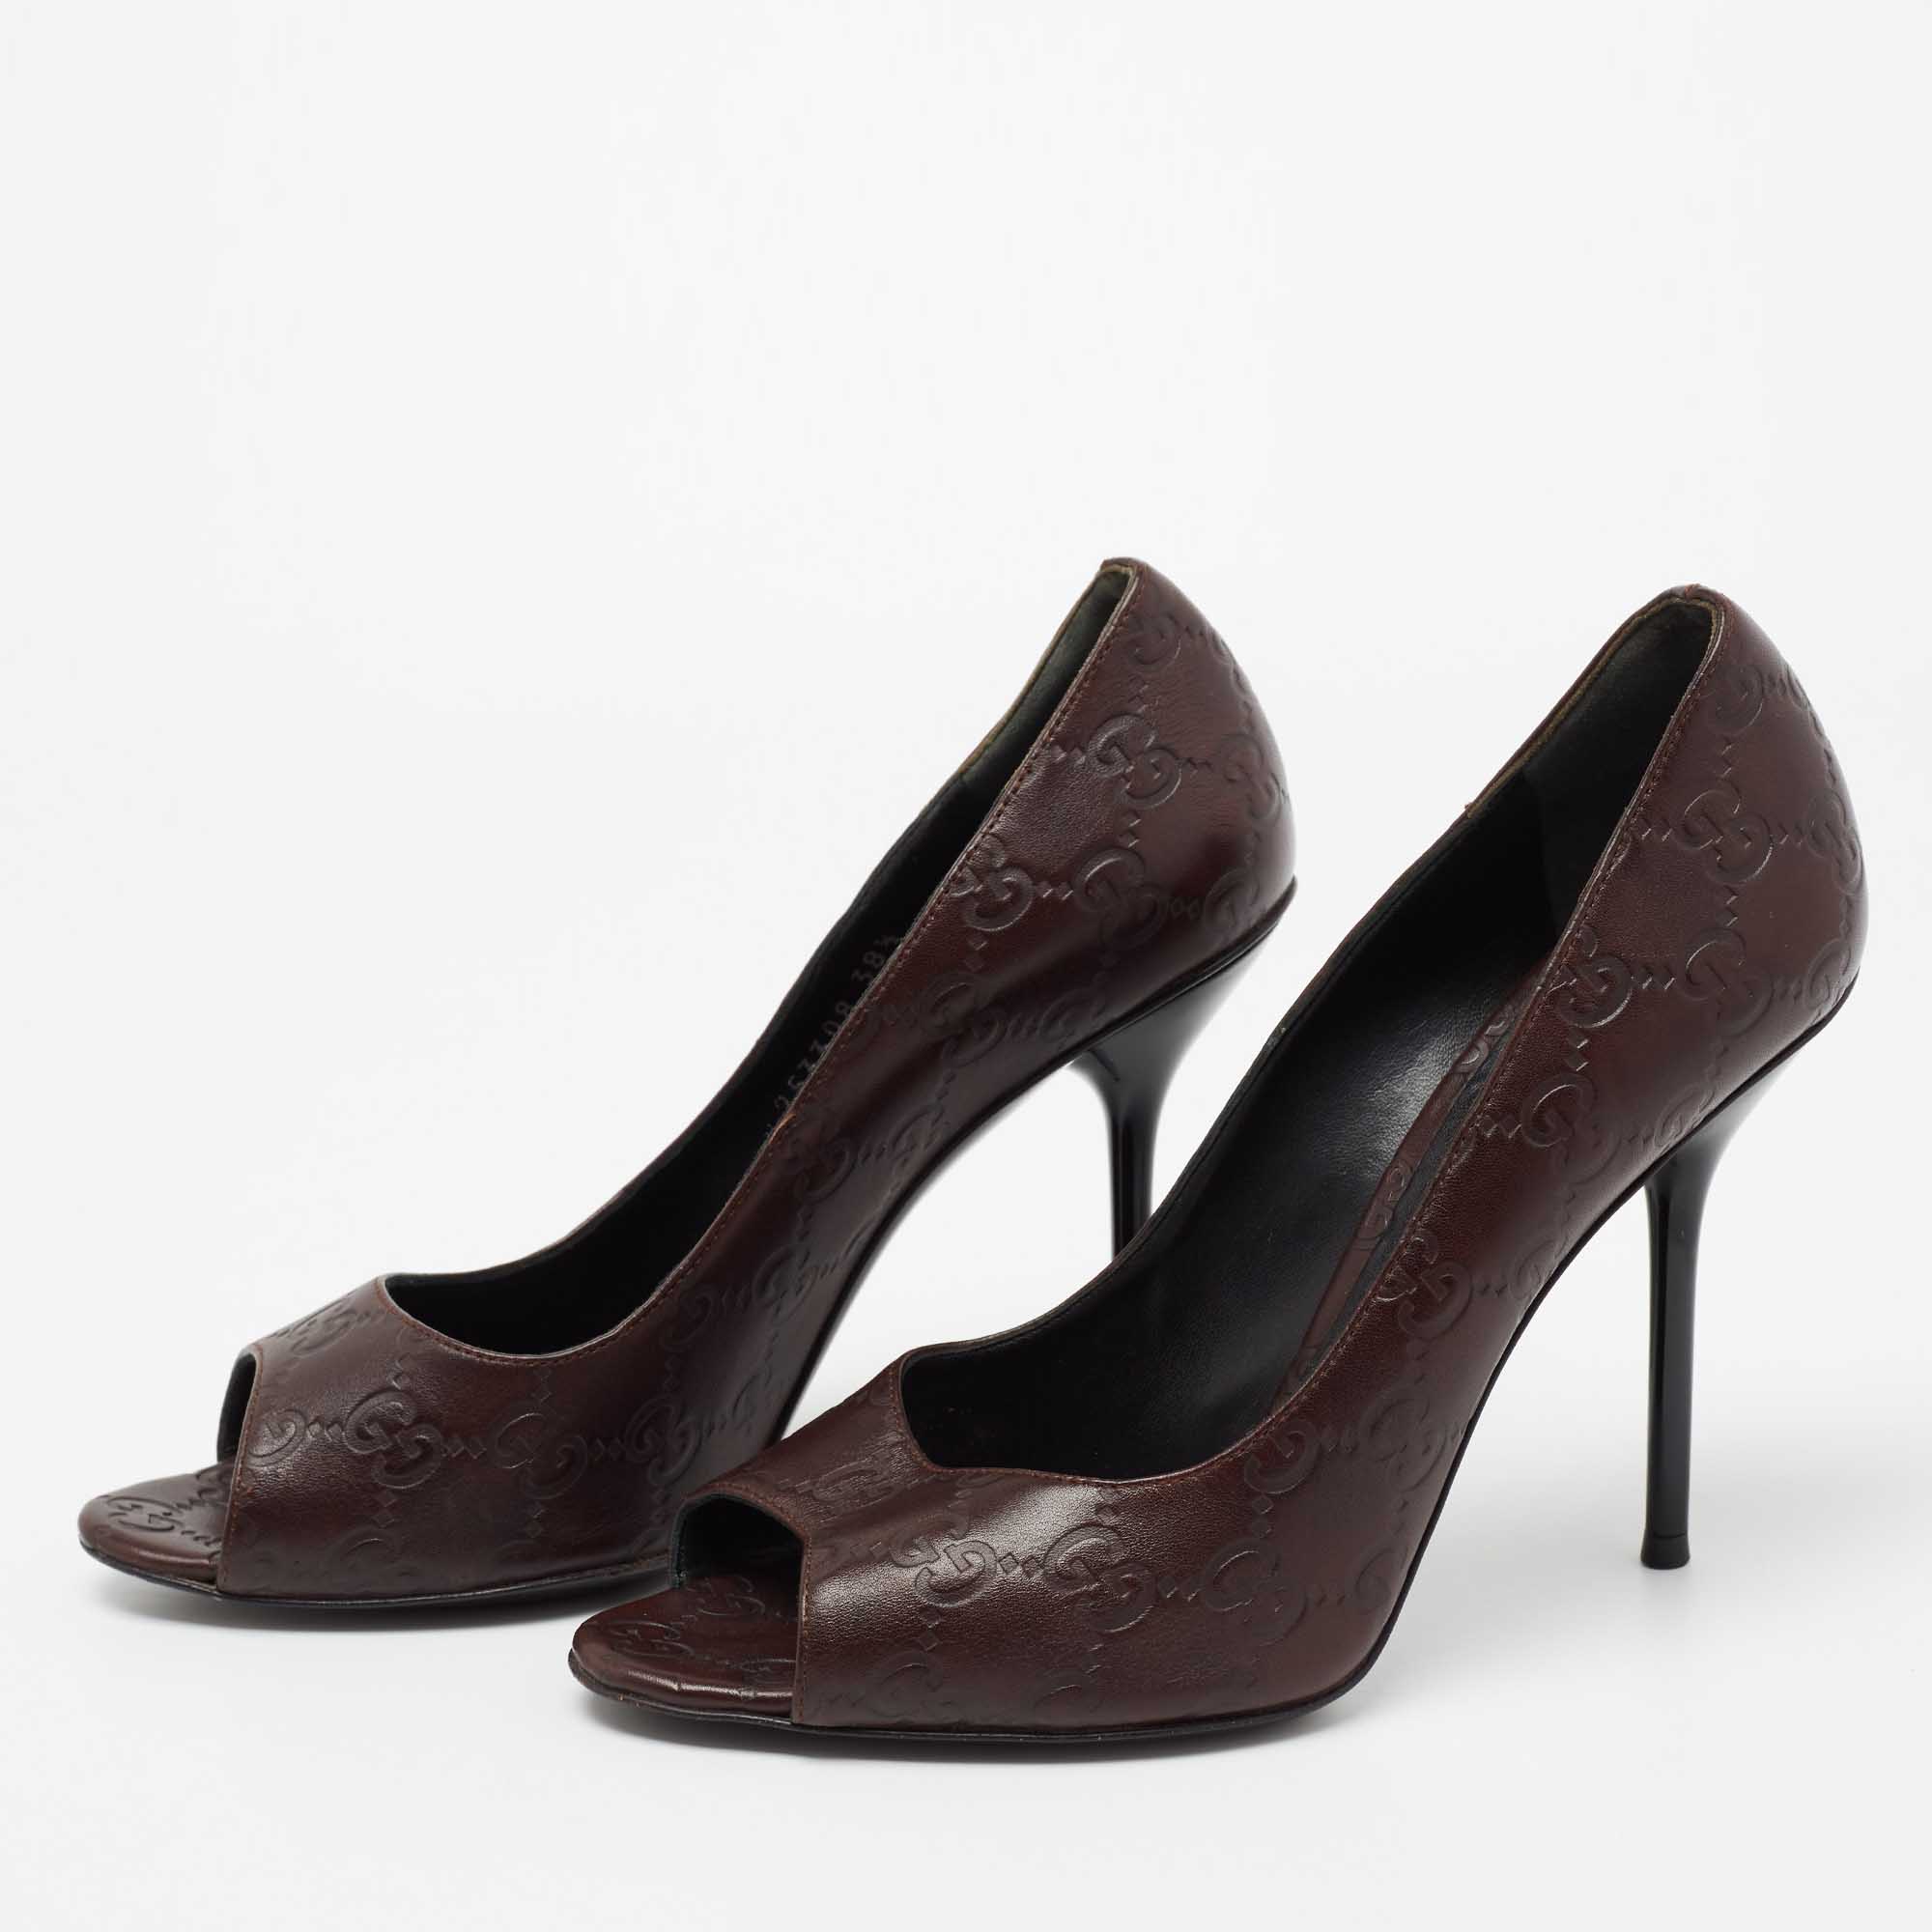 

Gucci Dark Burgundy Guccissima Leather Pointed Toe Pumps Size